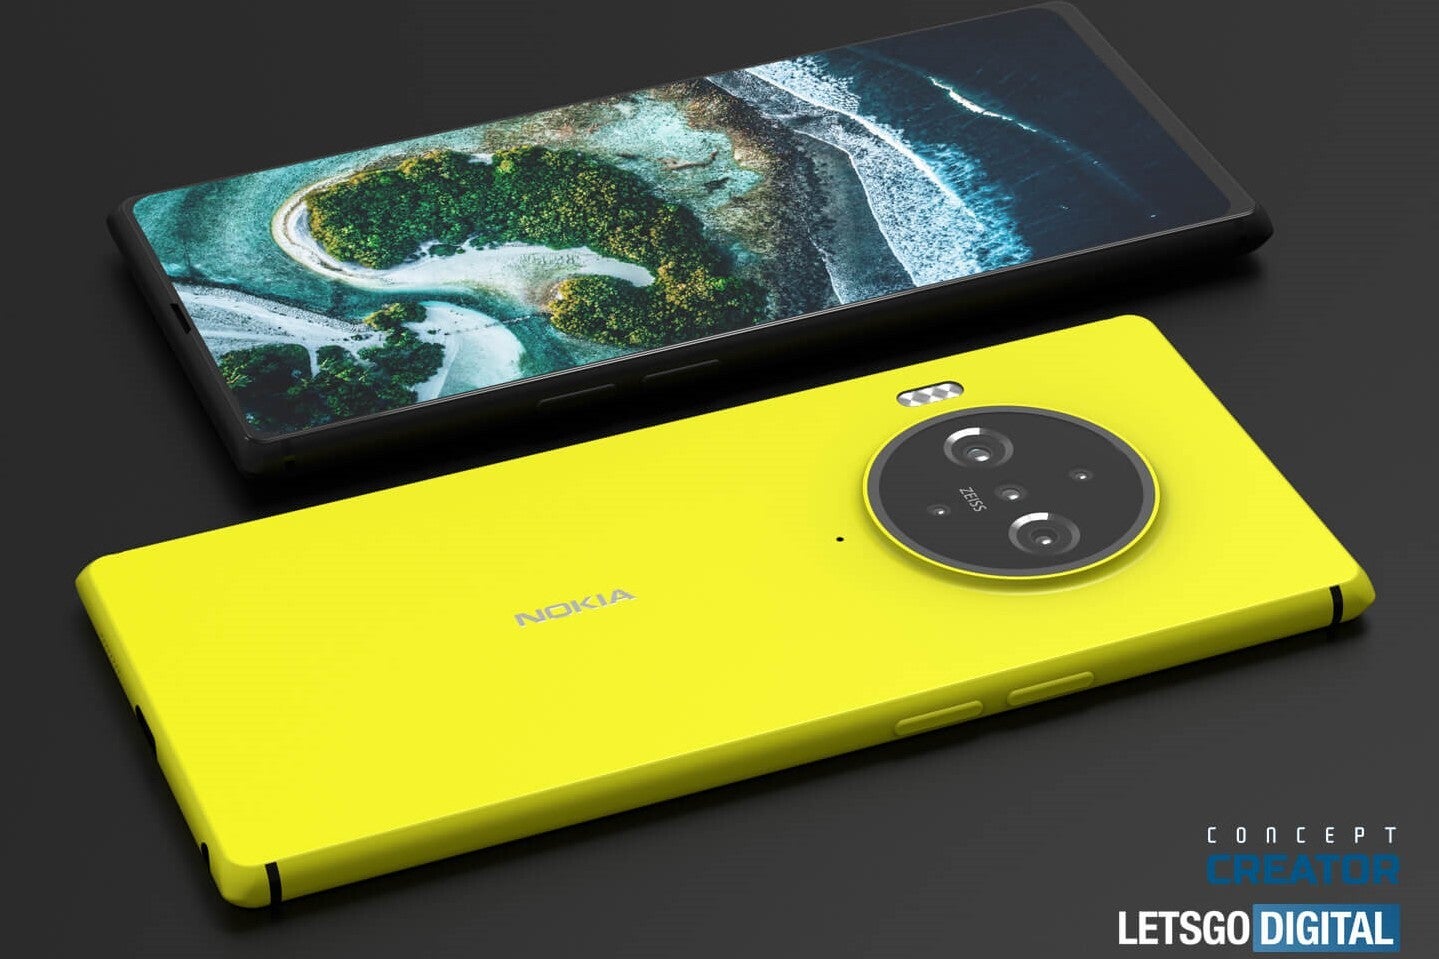 Nokia 9.3 PureView 5G concept render by Concept Creator - Evidence suggests Nokia 9.3 PureView 5G launch is near